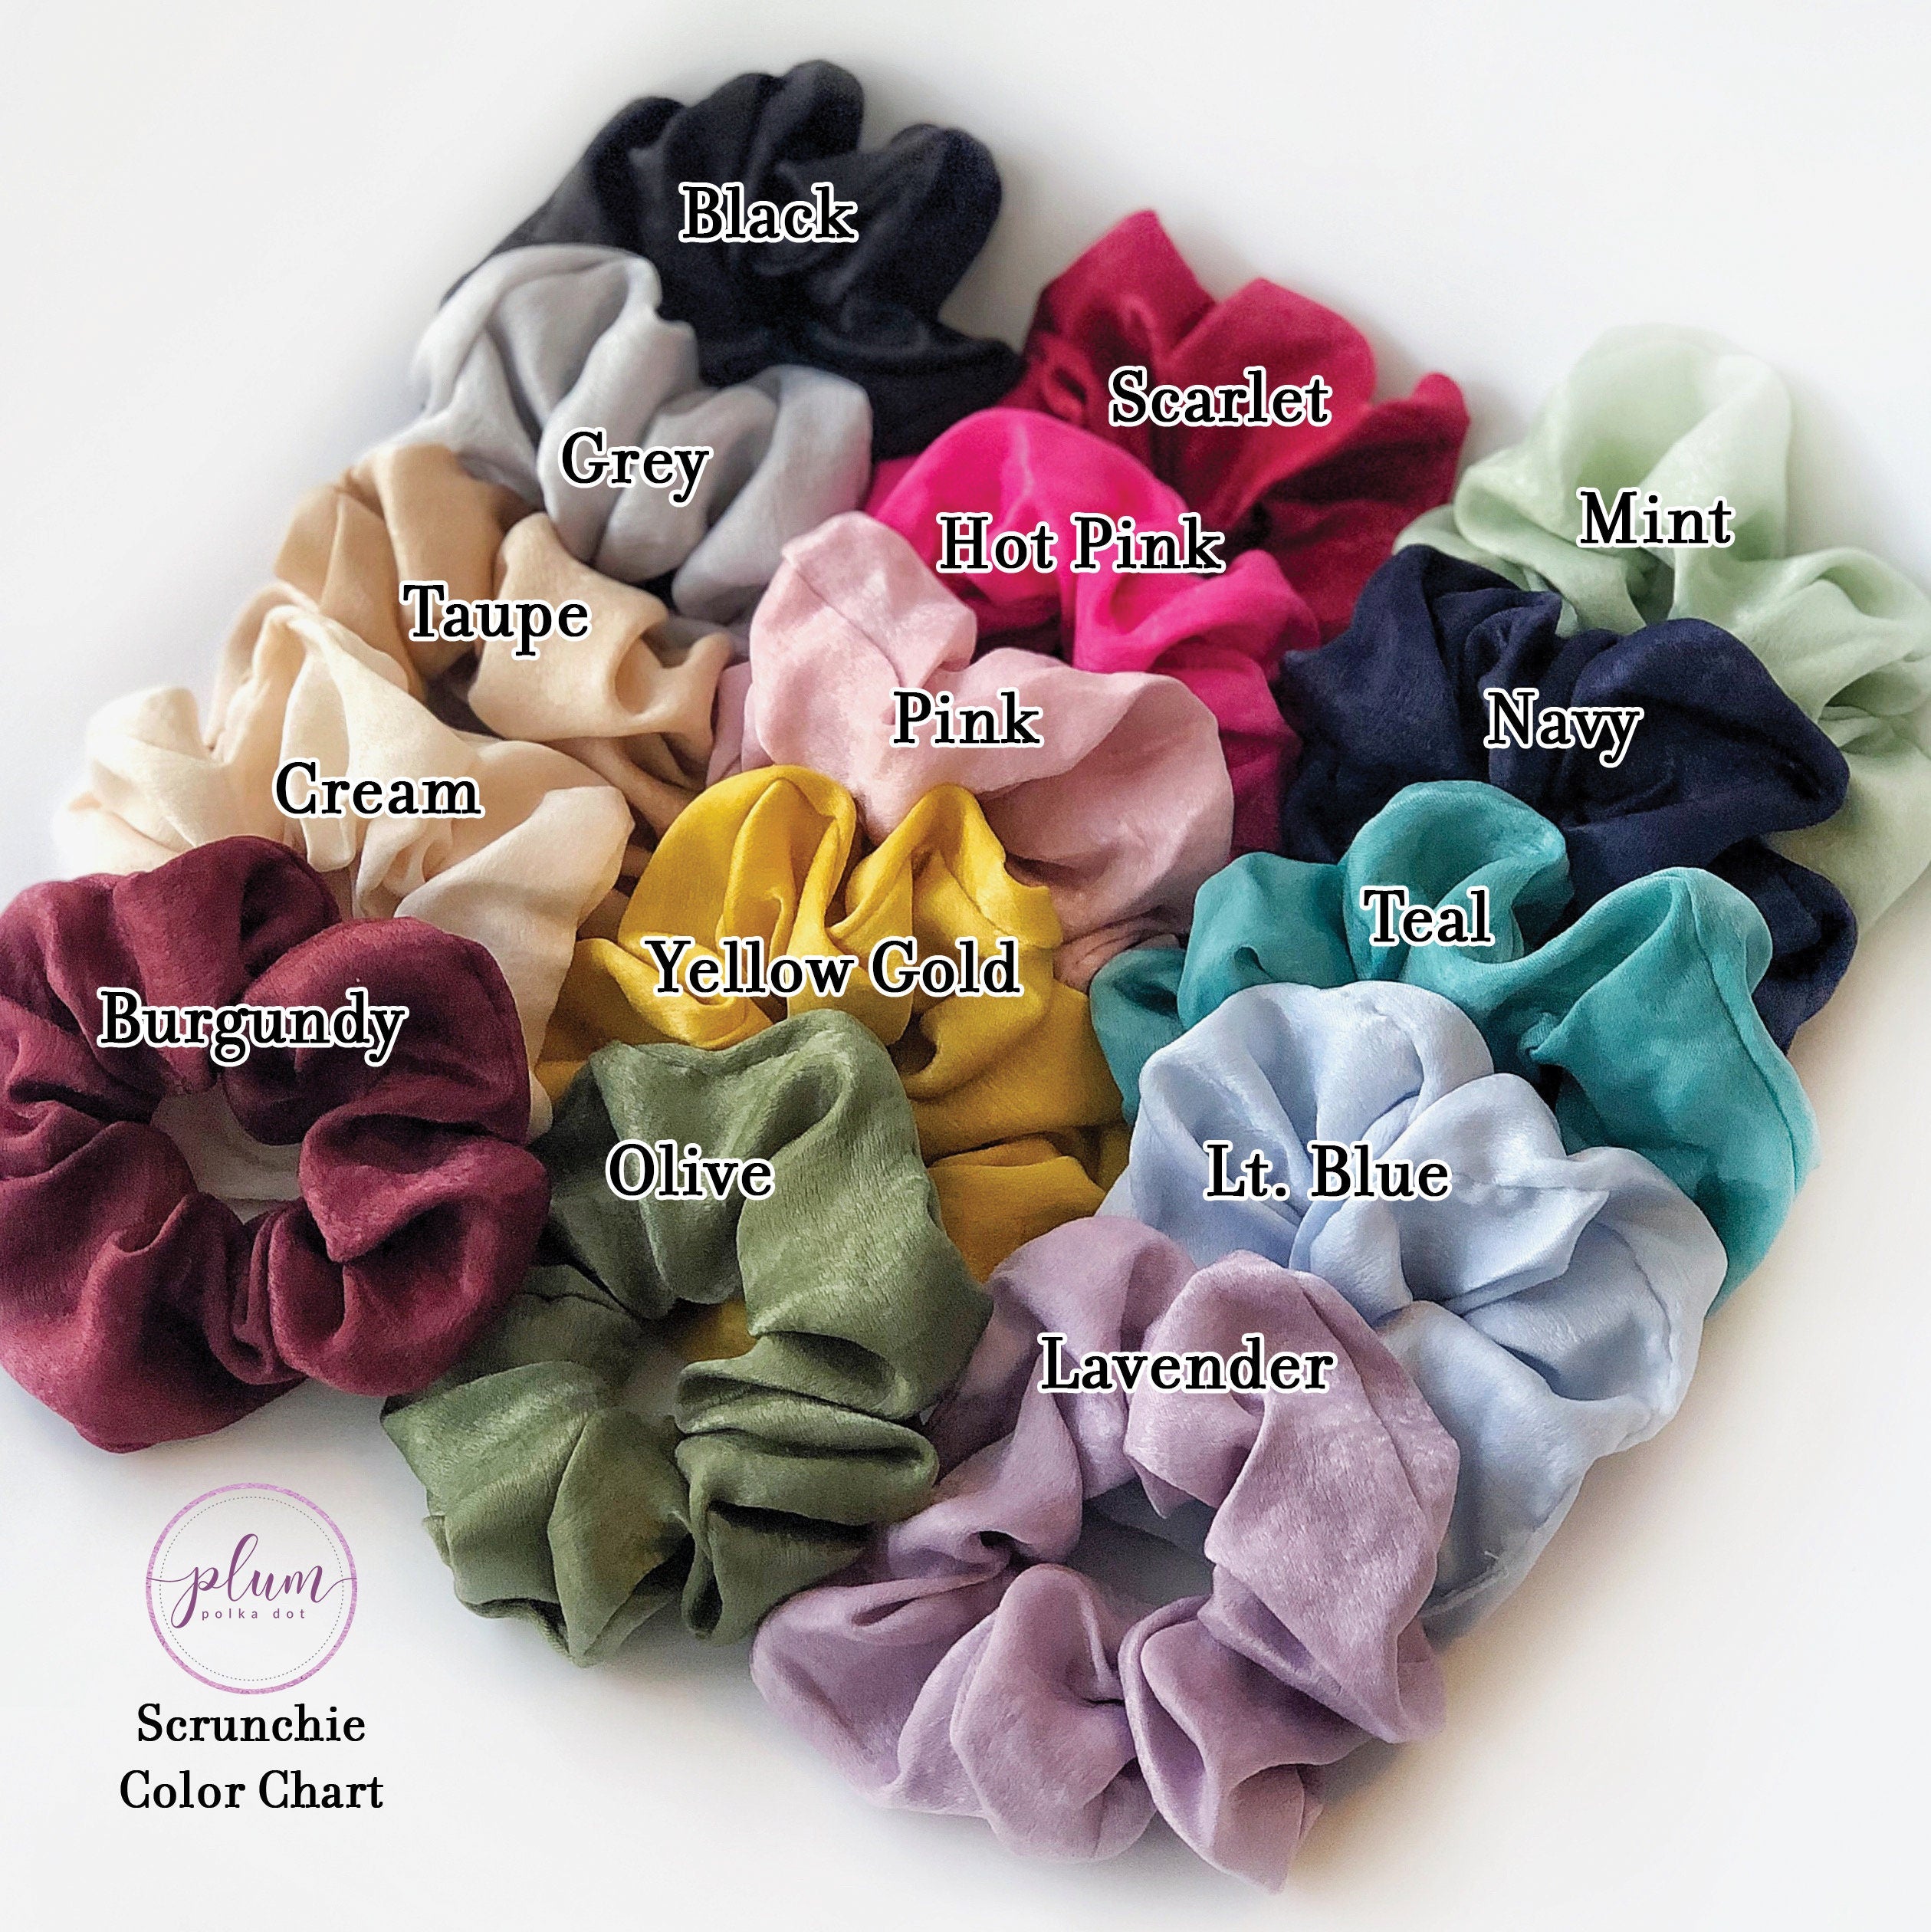 Hair Scrunchie Bridesmaid Gift, Thank You For Being My Bridesmaid, Bridal Party Gift, Junior Bridesmaid Gift, Flower Girl Thank You Gift